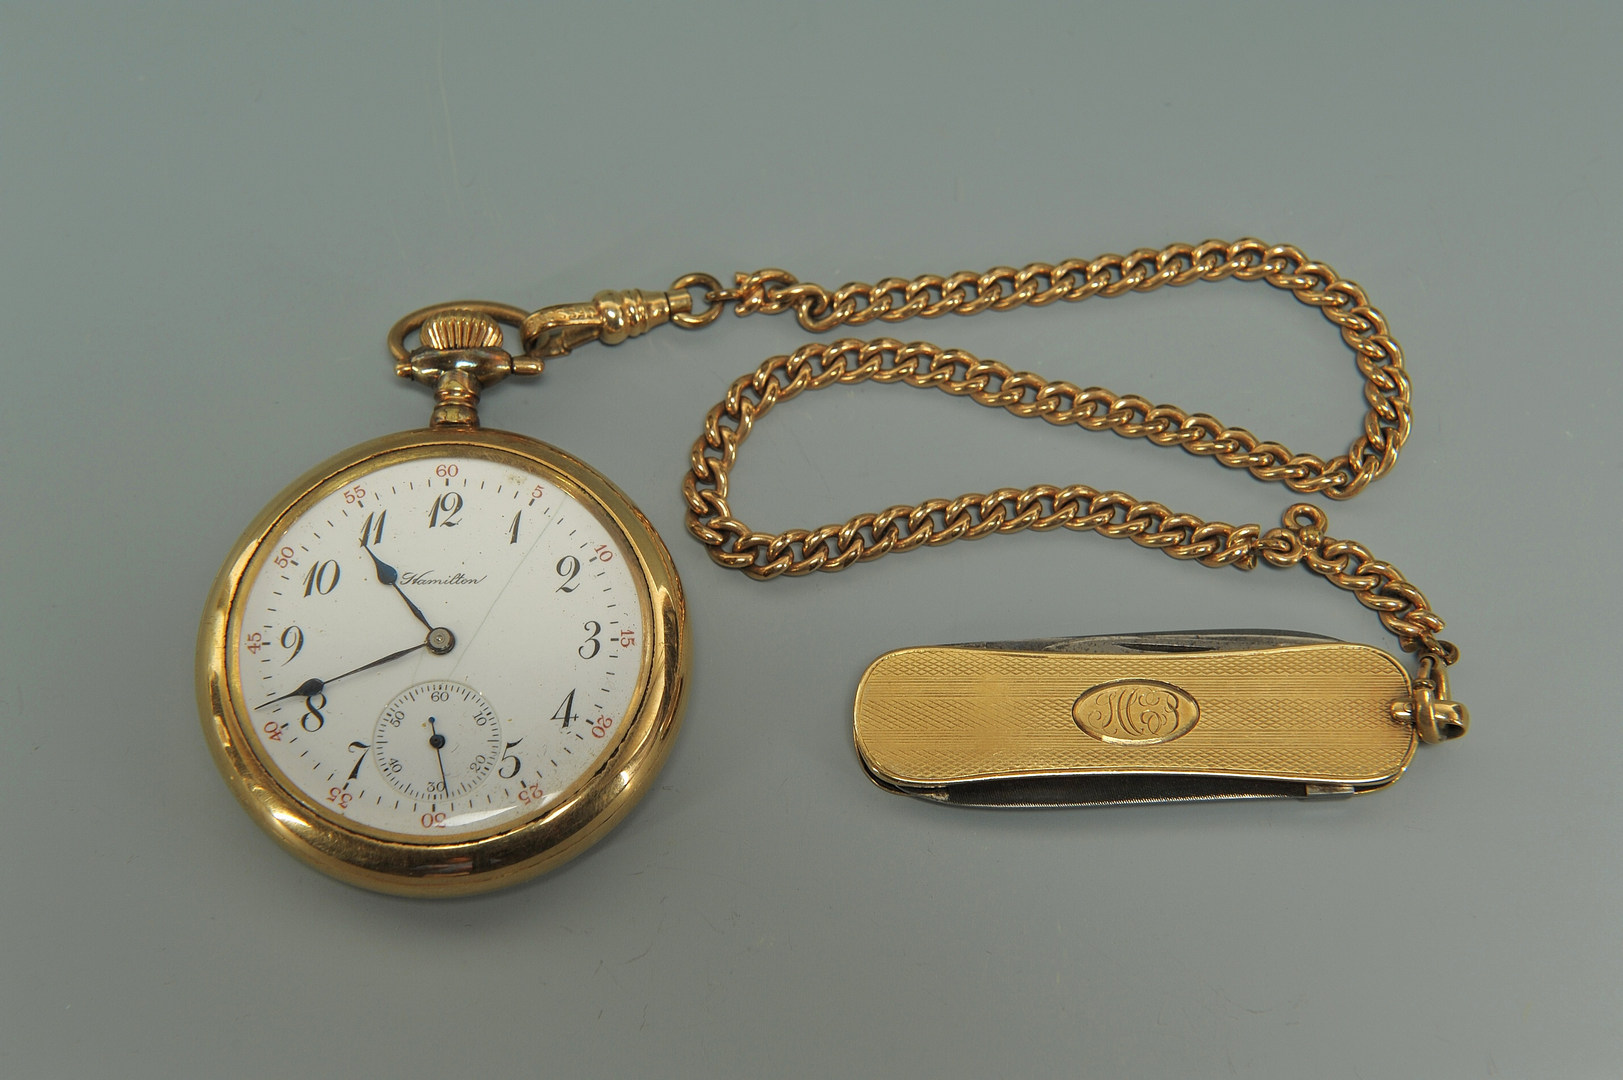 Lot 415: Four pocket watches and a knife1623 x 1080